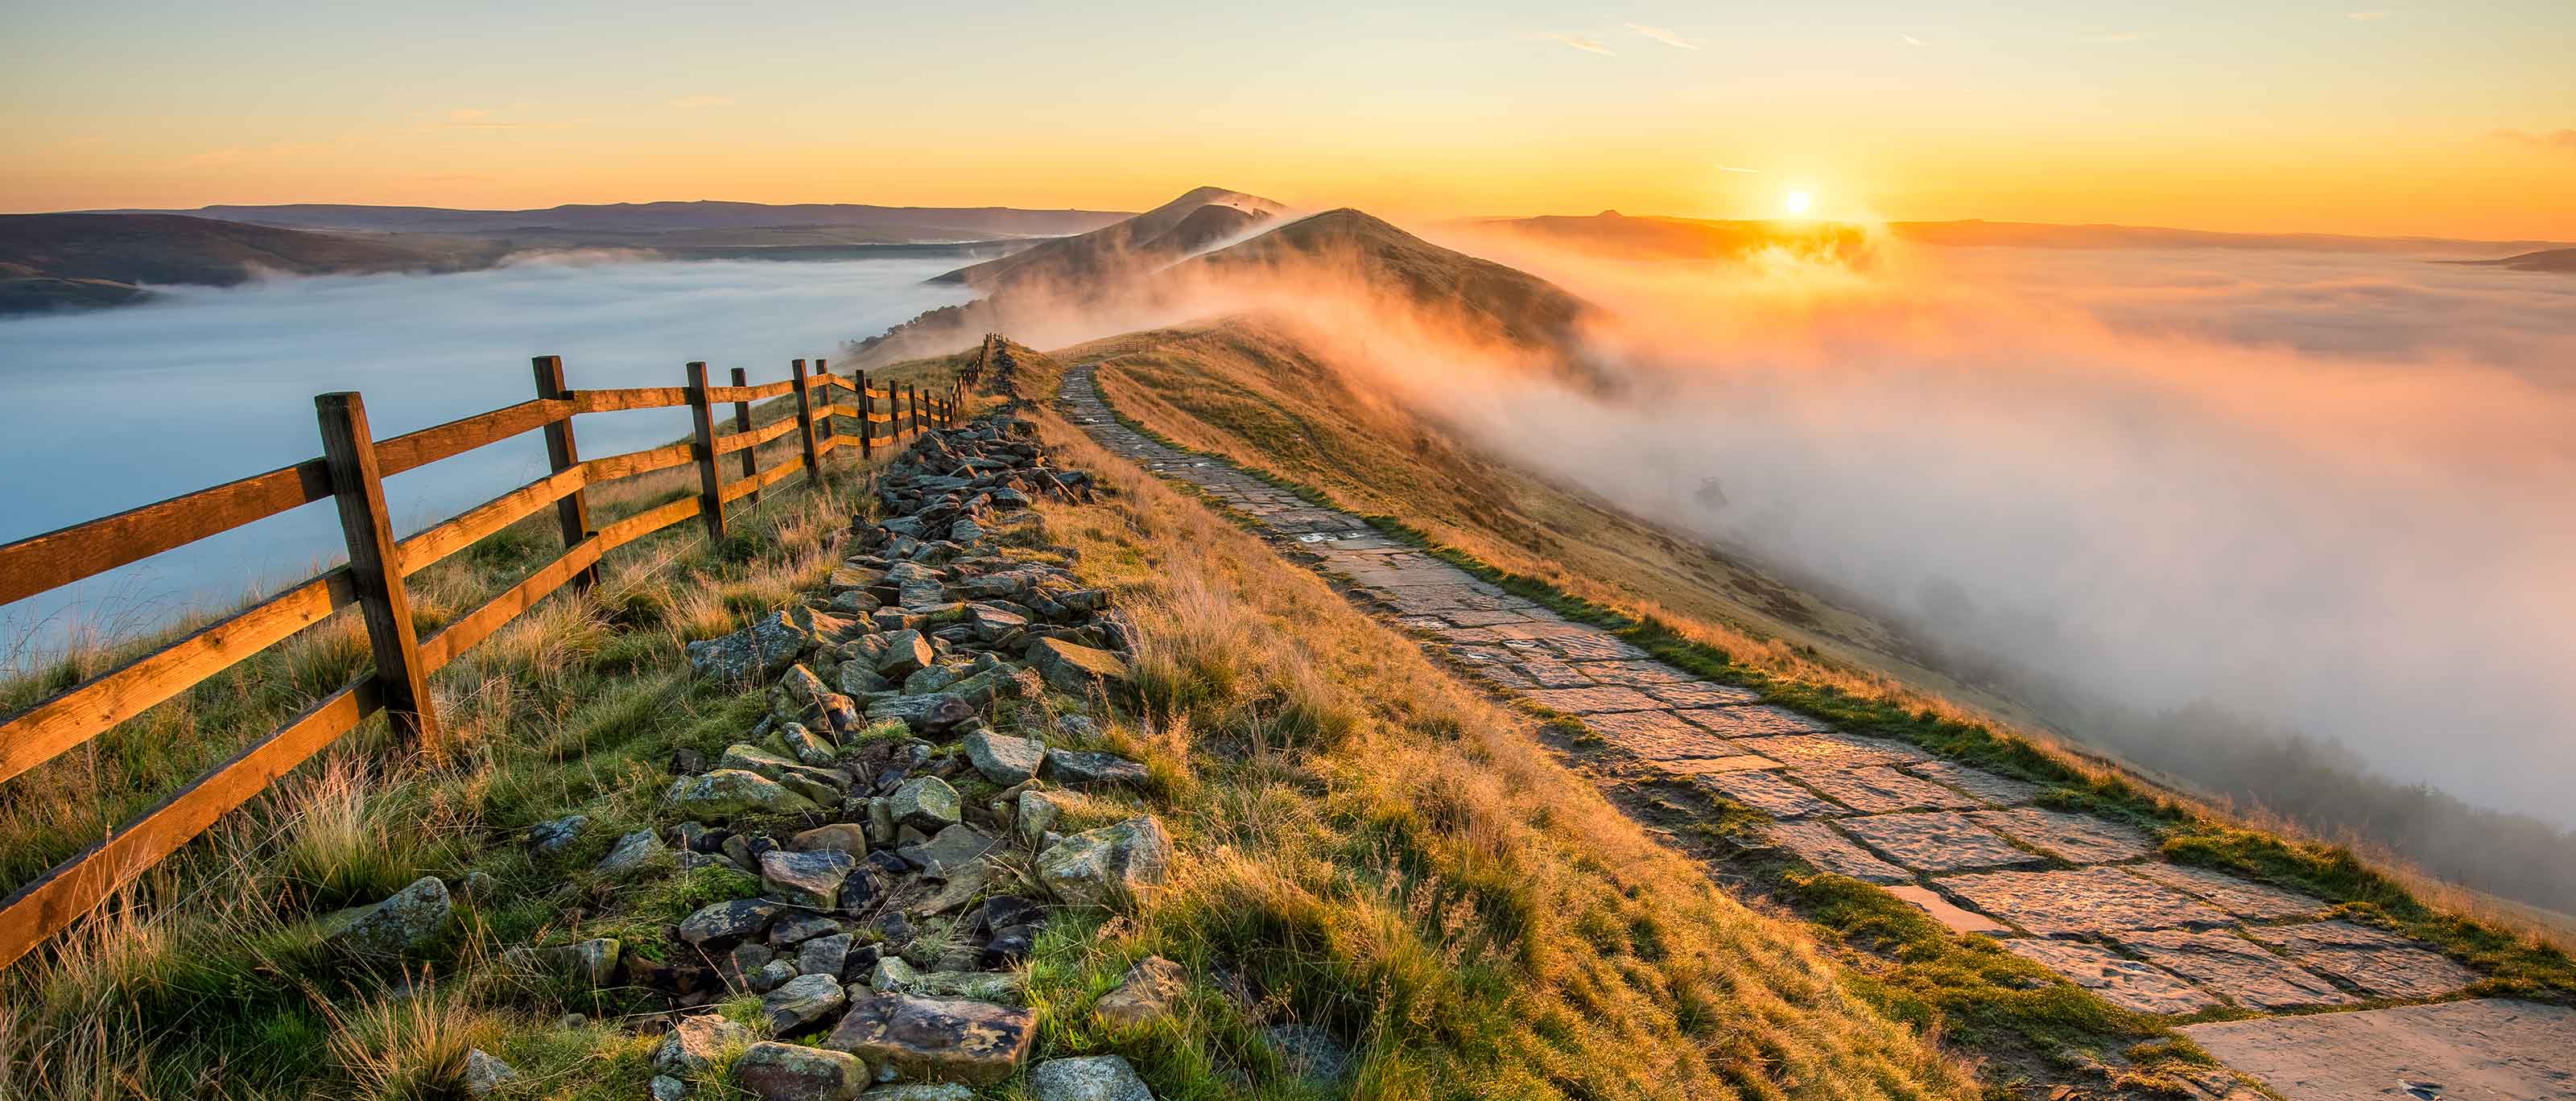 Thick cloud inversion with morning sun casting golden light on the landscape at Mam Tor in the Peak District.  